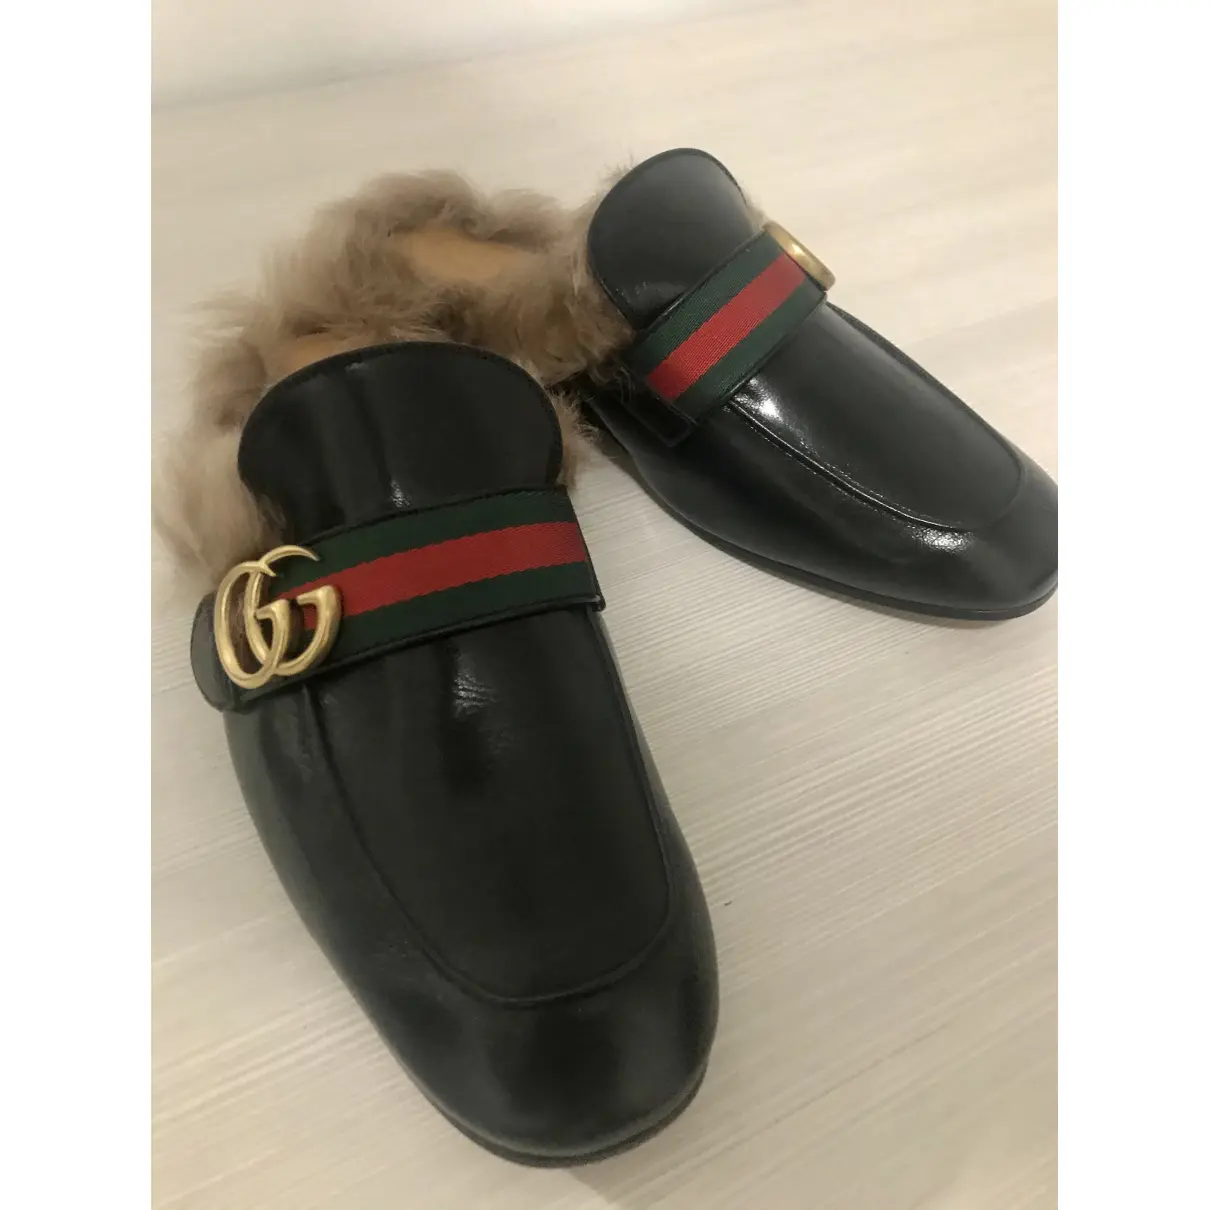 Buy Gucci Princetown leather flats online